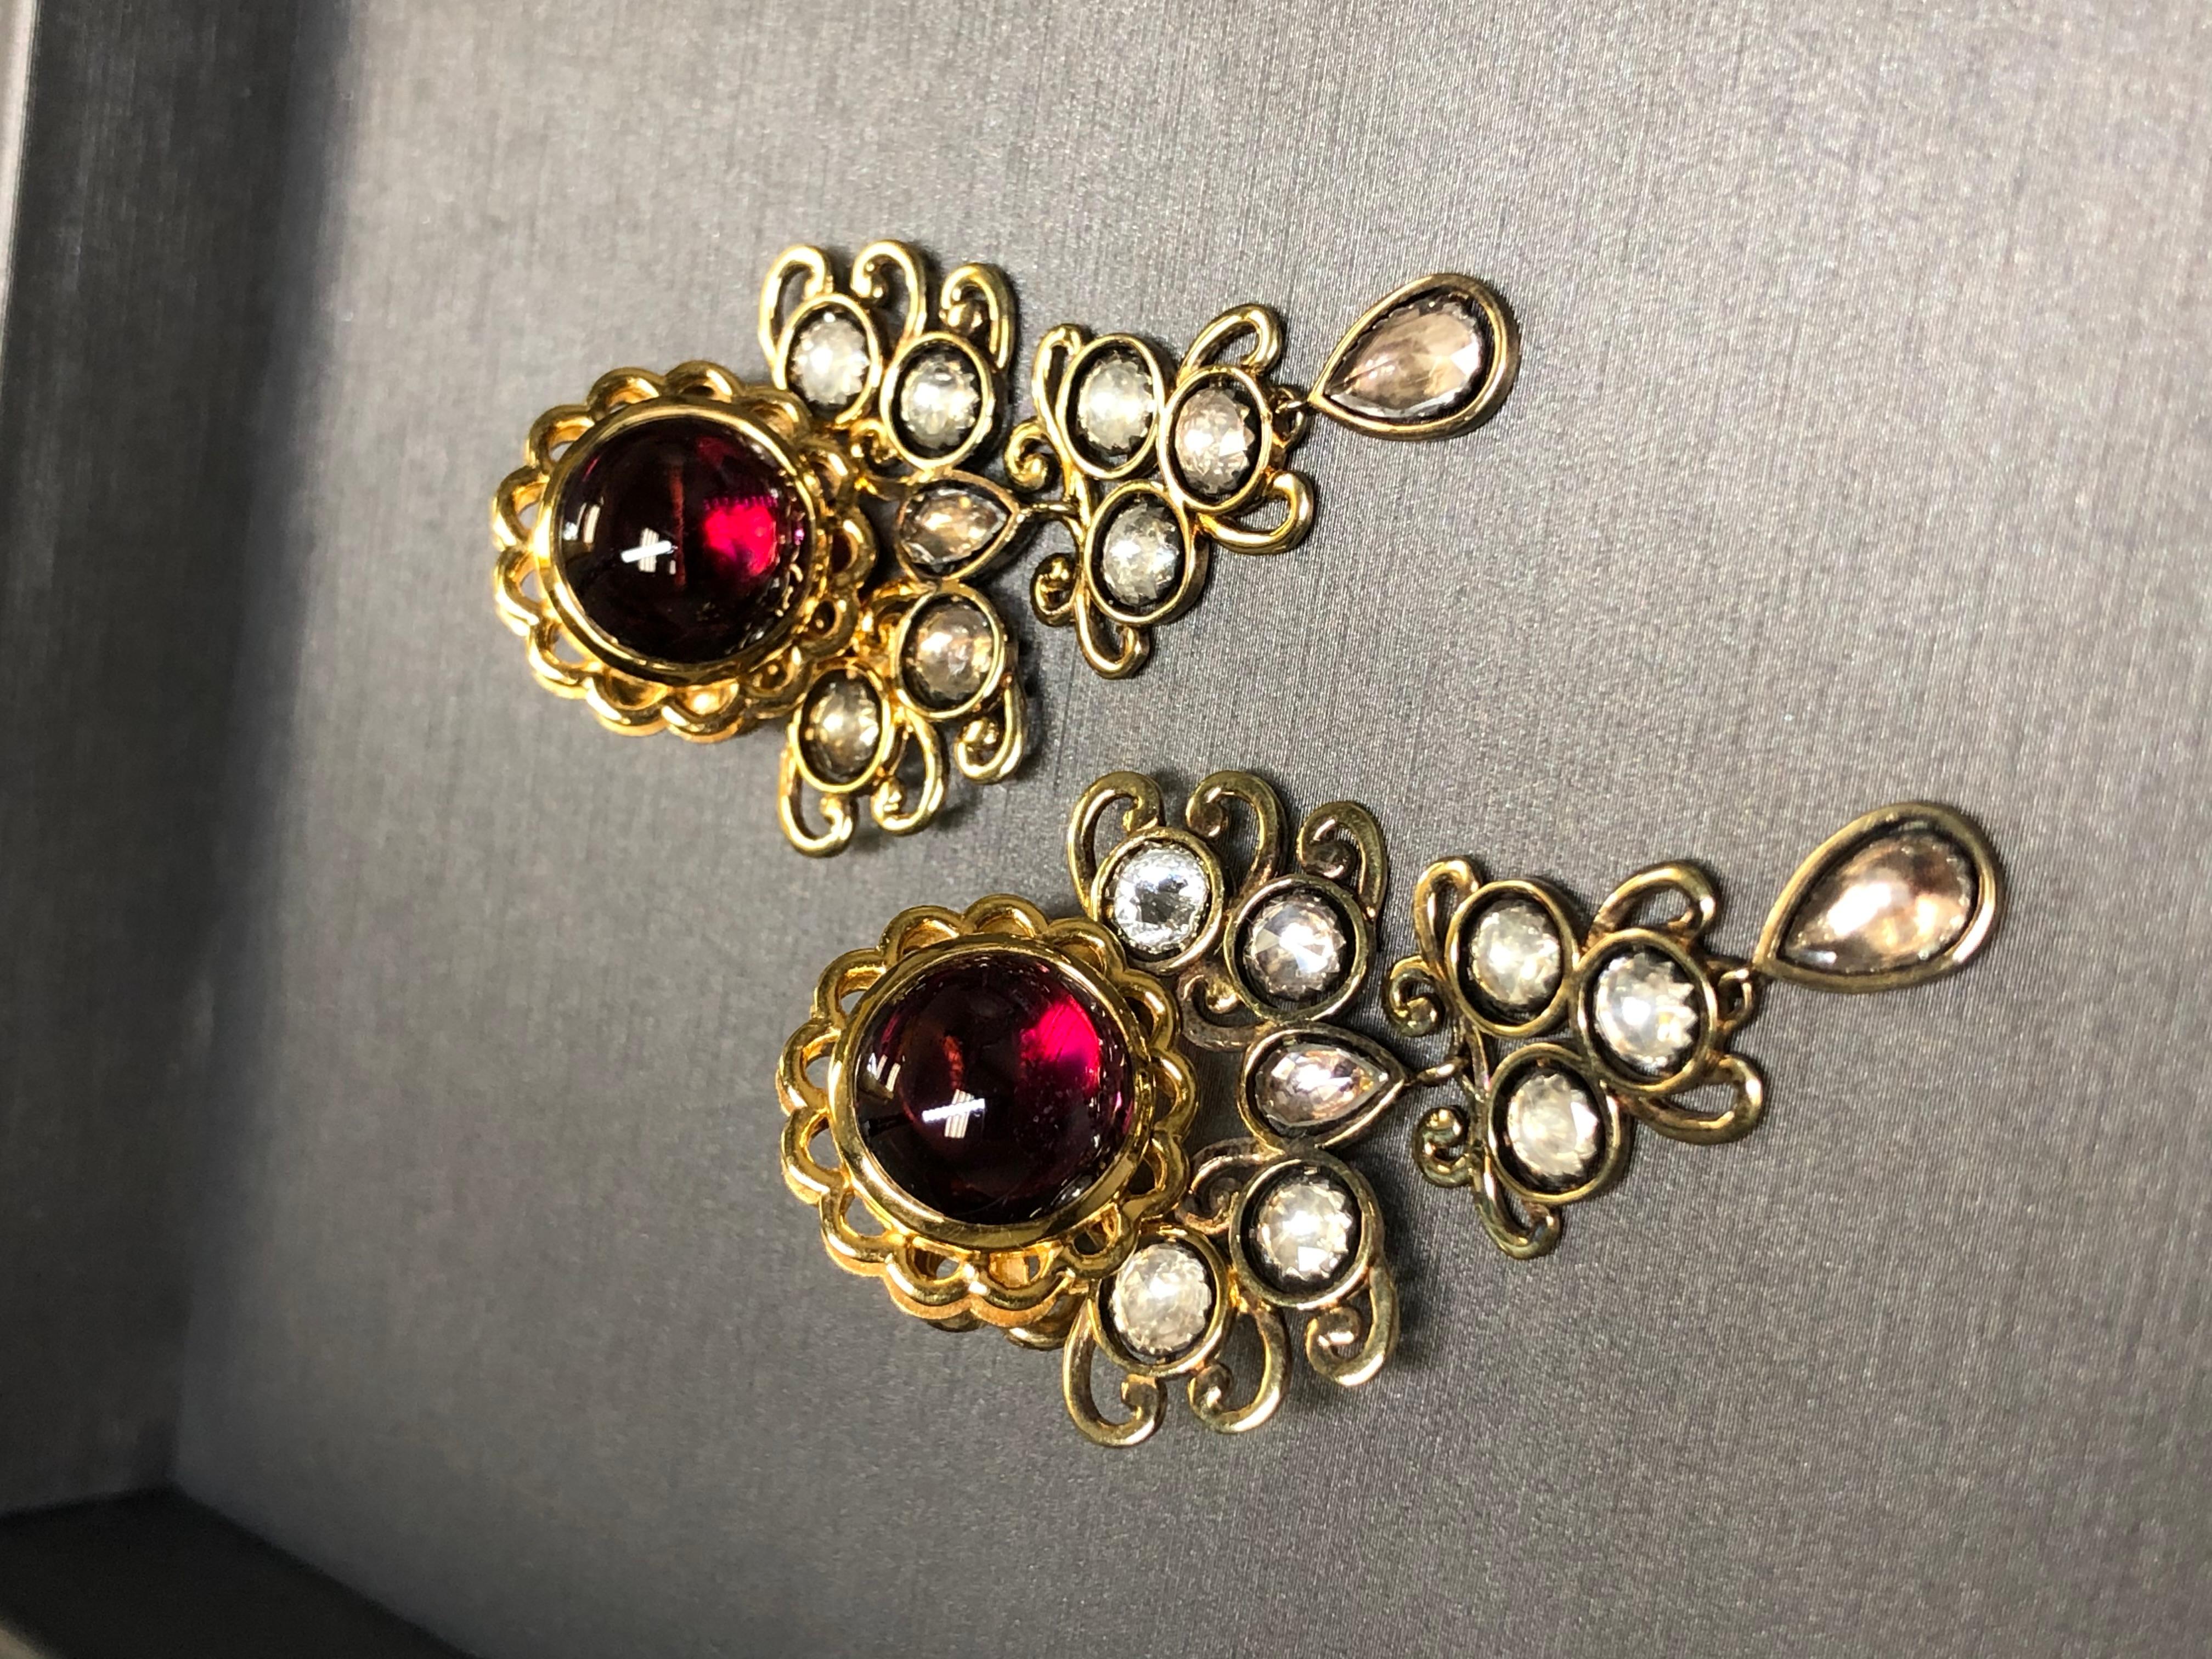 
A beautiful and ornate pair of earrings done in 18K yellow gold and centered but large cabochons of rhodolite garnet (10.4mm in diameter) atop numerous foil-backed rose cut natural quartz. A simply designed pair of earrings with such a regal look.